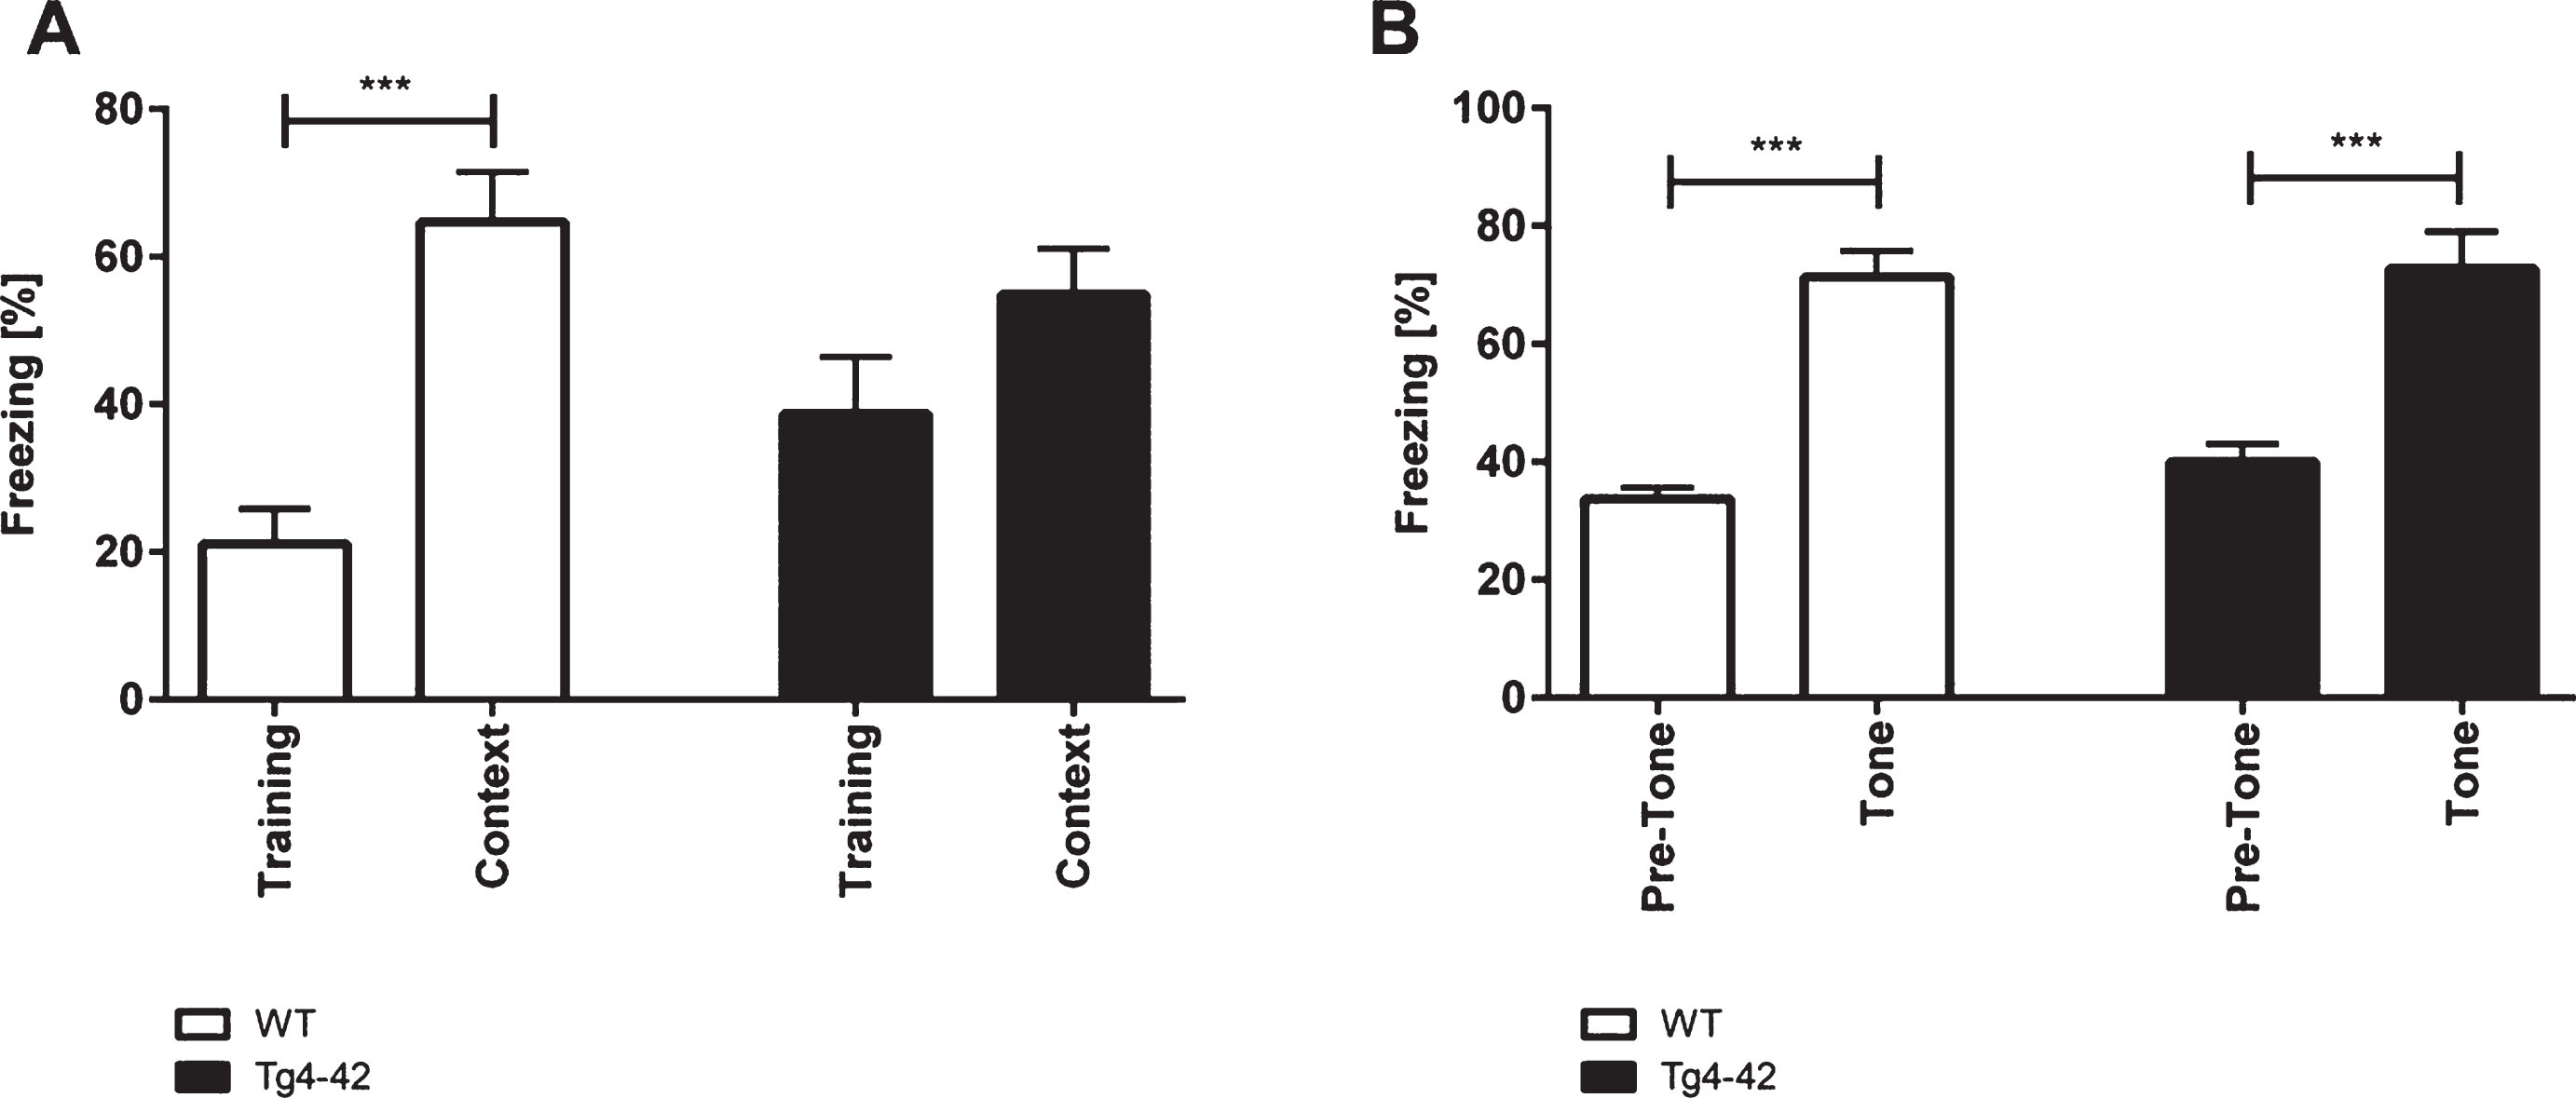 Impaired contextual conditioning in Tg4-42 mice. Tg4-42 and WT mice were trained in a contextual (A) and tone fear (B) conditioning task (n = 10-12). During the initial training session involving a tone-foot-shock pairing, WT and Tg4-42 mice displayed comparable degrees of freezing (A). Animals were reintroduced to the original training context 24 hours post training and tested for contextual memory. WT shock froze significantly more during re-exposure to the context compared to the training trial. In contrast, Tg4-42 mice did not associate the context with the received foot-shock as freezing was not significantly different between the training and the tone trial (A). Mice were placed in an altered fear conditioning chamber 48 hours post training and tested for freezing during tone presentation. WT and Tg4-42 mice showed a significant increase on freezing response to the tone presentation (B). Data presented as mean±S.E.M. One-way analysis of variance (ANOVA) followed by Bonferroni multiple comparisons. ***p < 0.001.